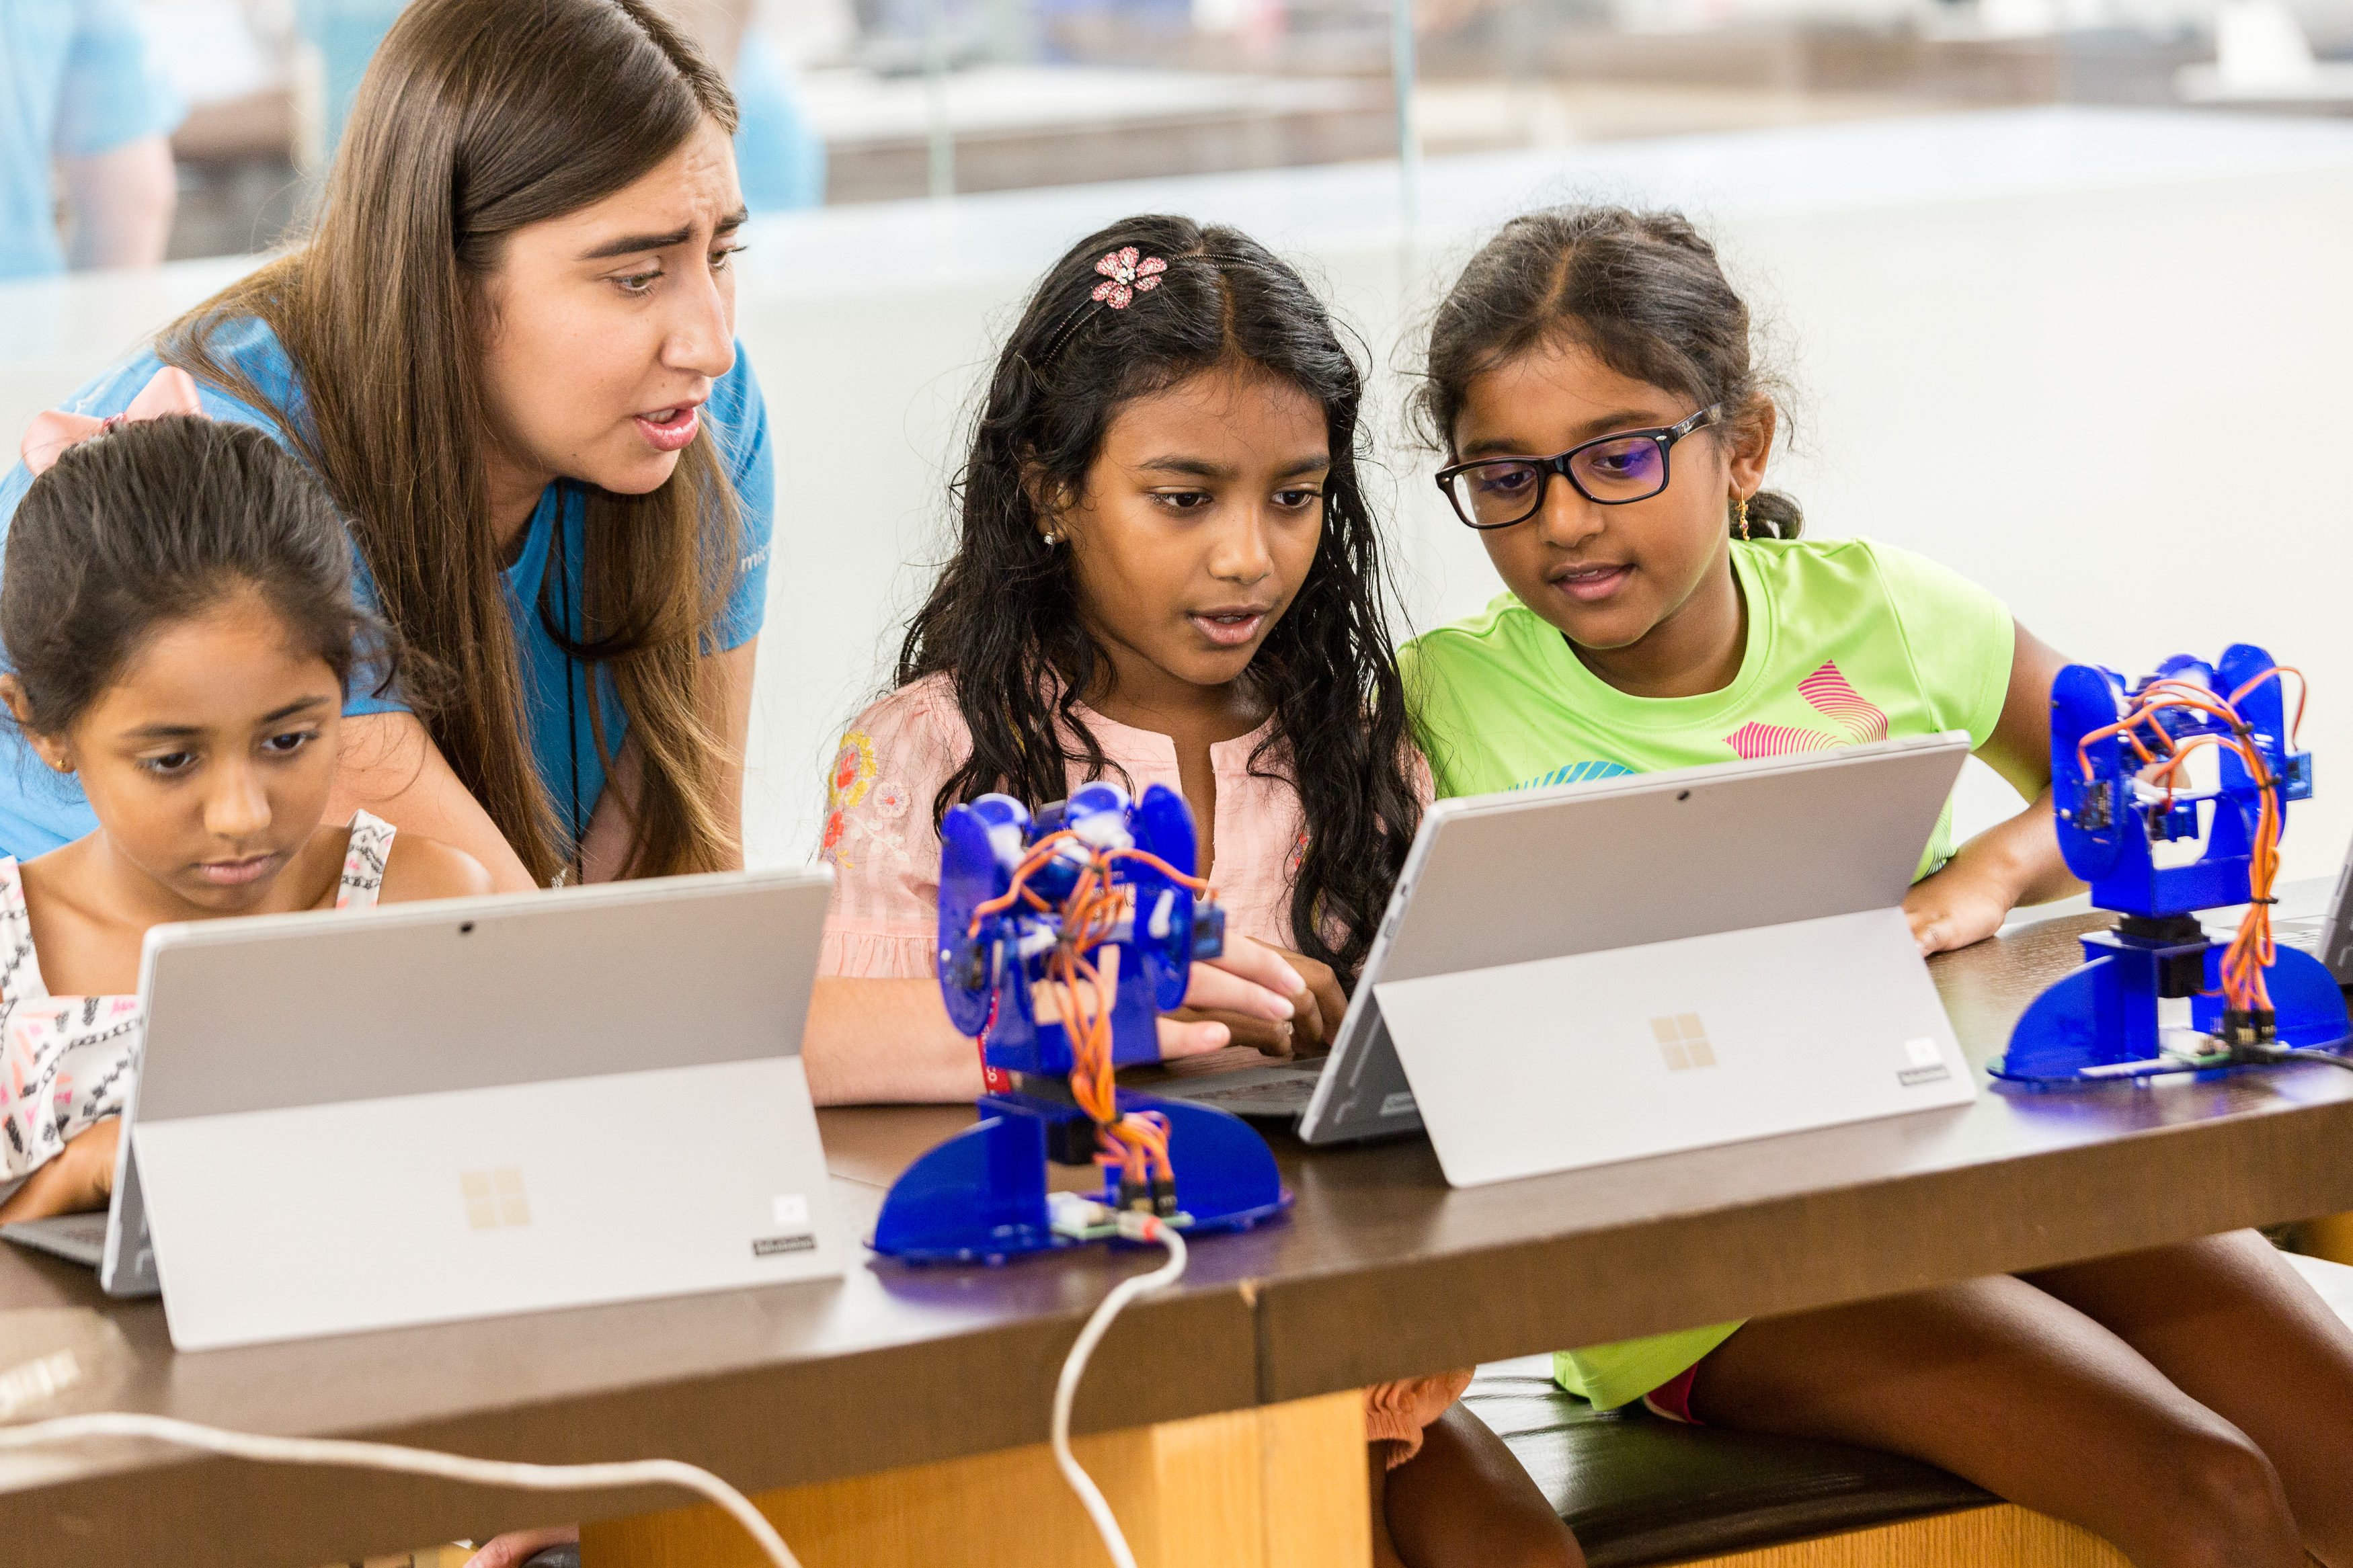 Microsoft Store and Girl Scouts launches new STEM program for girls